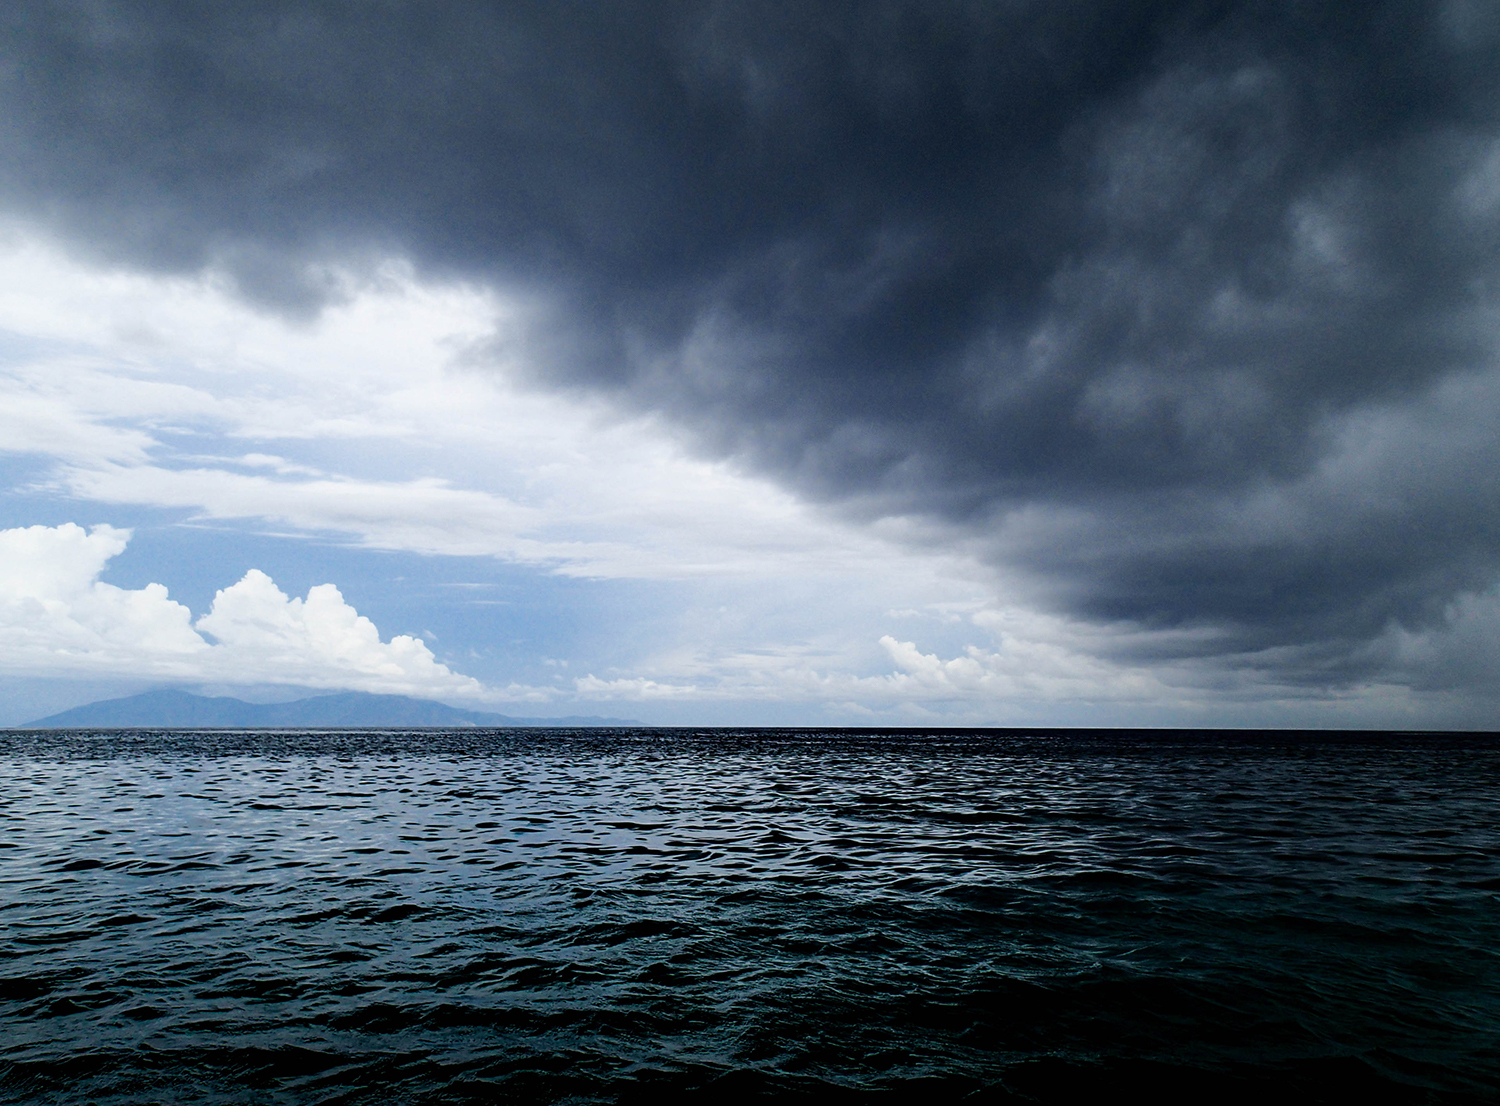 <p>Timor-Leste's rainy season delivers another dramatic sky out of the blue, this time at Jesus Backside Beach – so named for being behind the large statue of Christ that overlooks Dili's seafront. These clouds emerged suddenly and with tremendous rain moments later, before dissipating just as quickly as they'd arrived.</p>